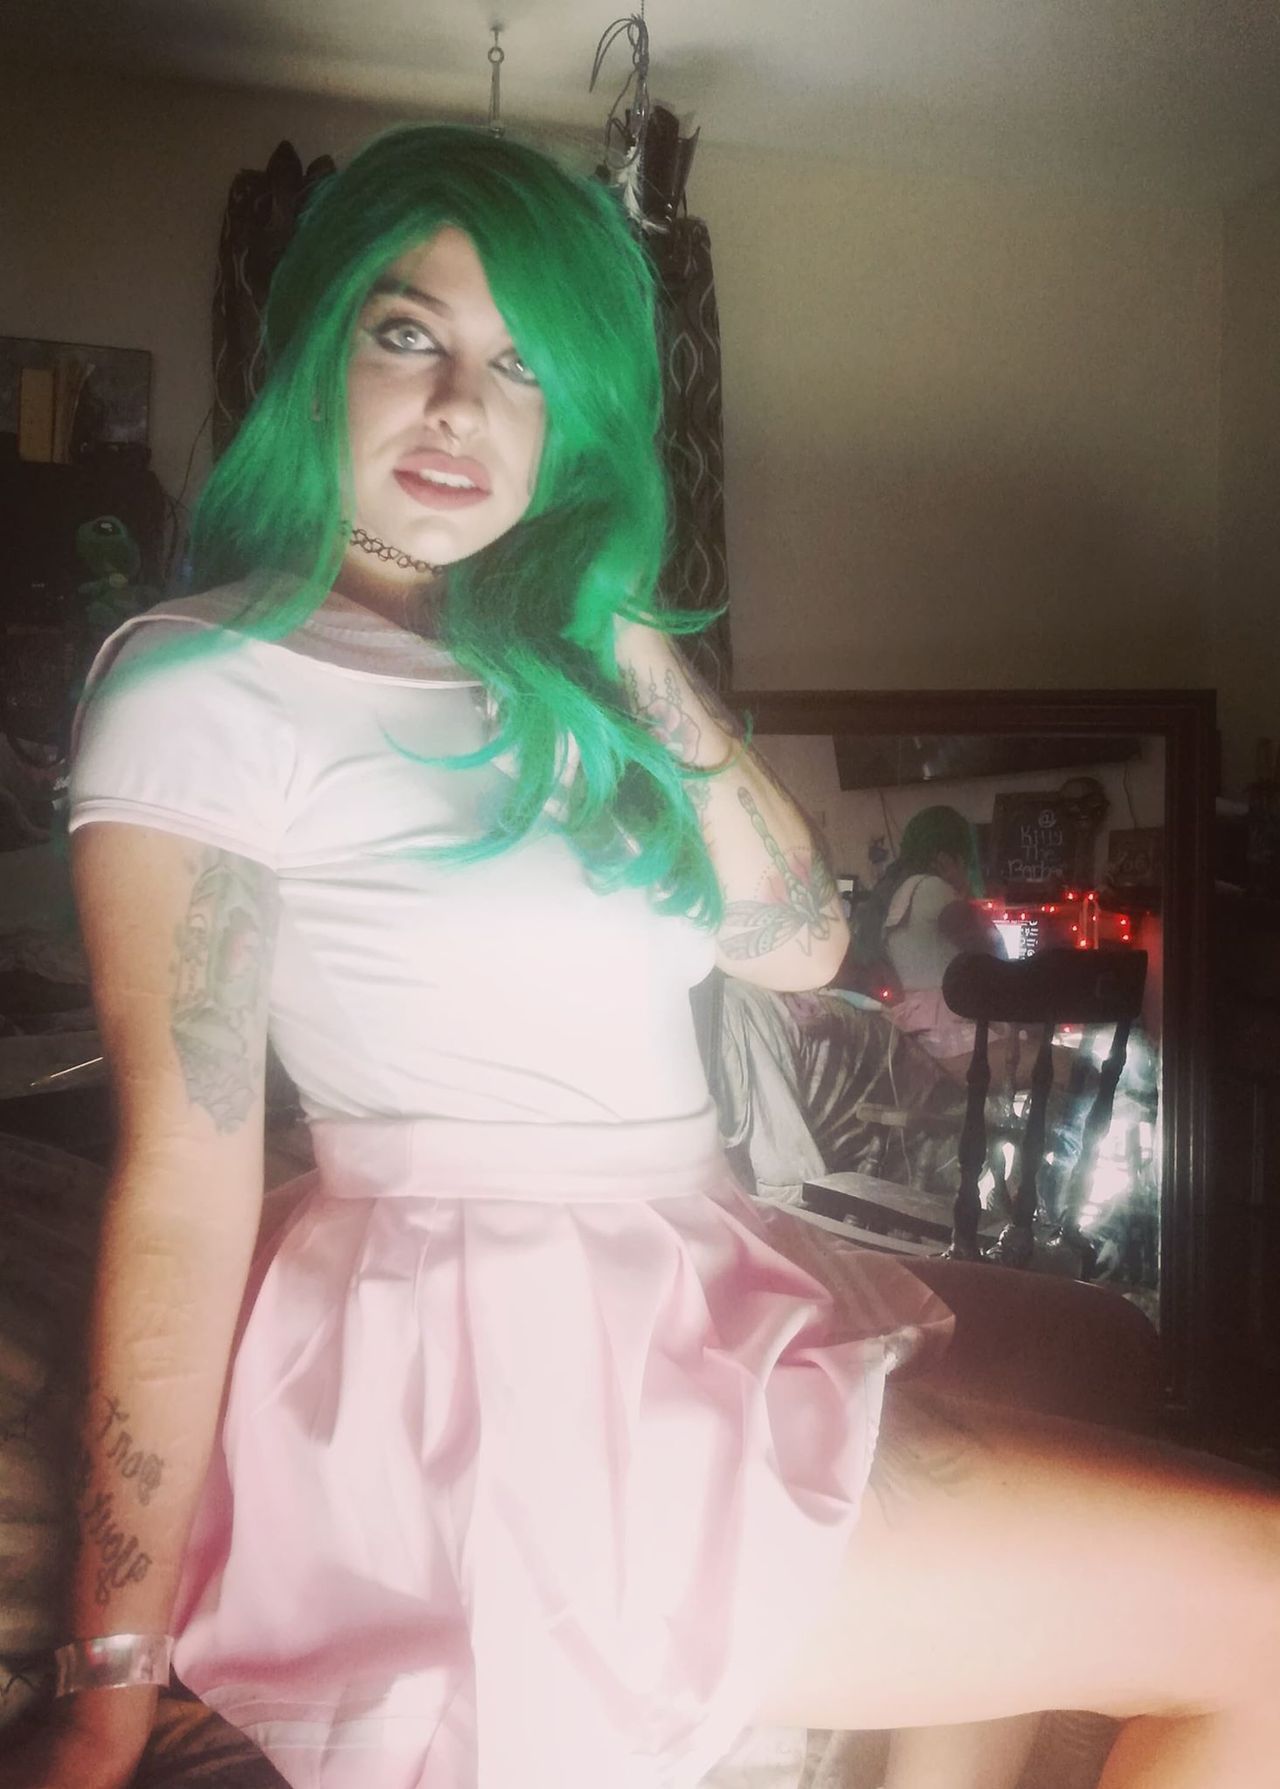 kittysdeadlynightshade:  Had alittle dress up fun in my sailor neptune cos play outfit